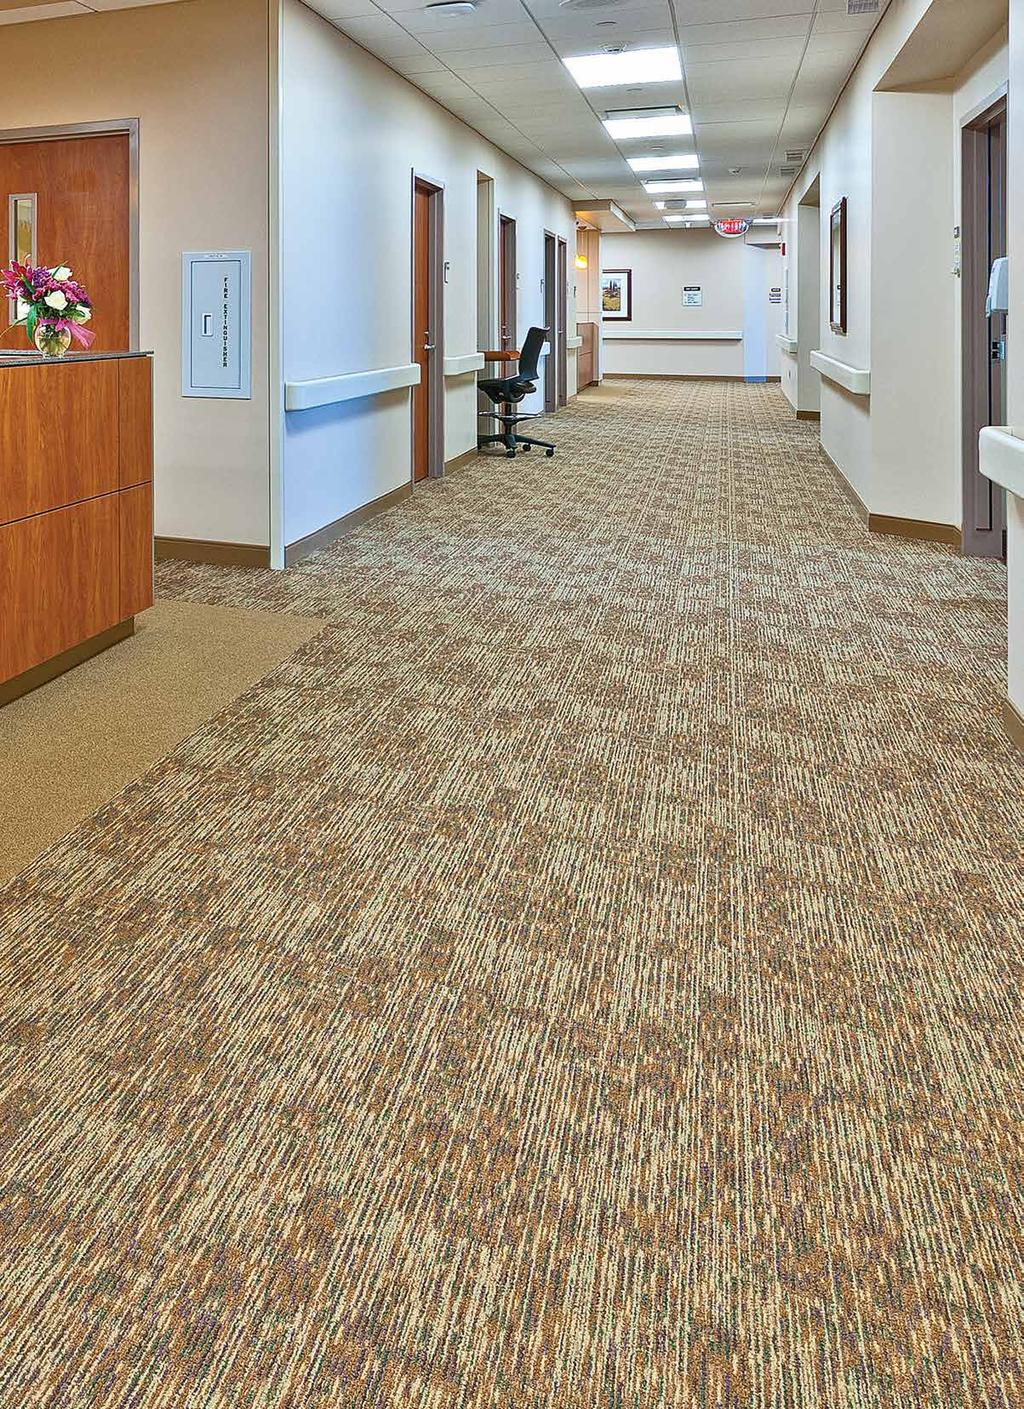 POWERBOND BENEFITS Powerbond is a revolutionary hybrid resilient sheet flooring that enhances safety, comfort and performance, resulting in improved healing environments and satisfaction of patients,